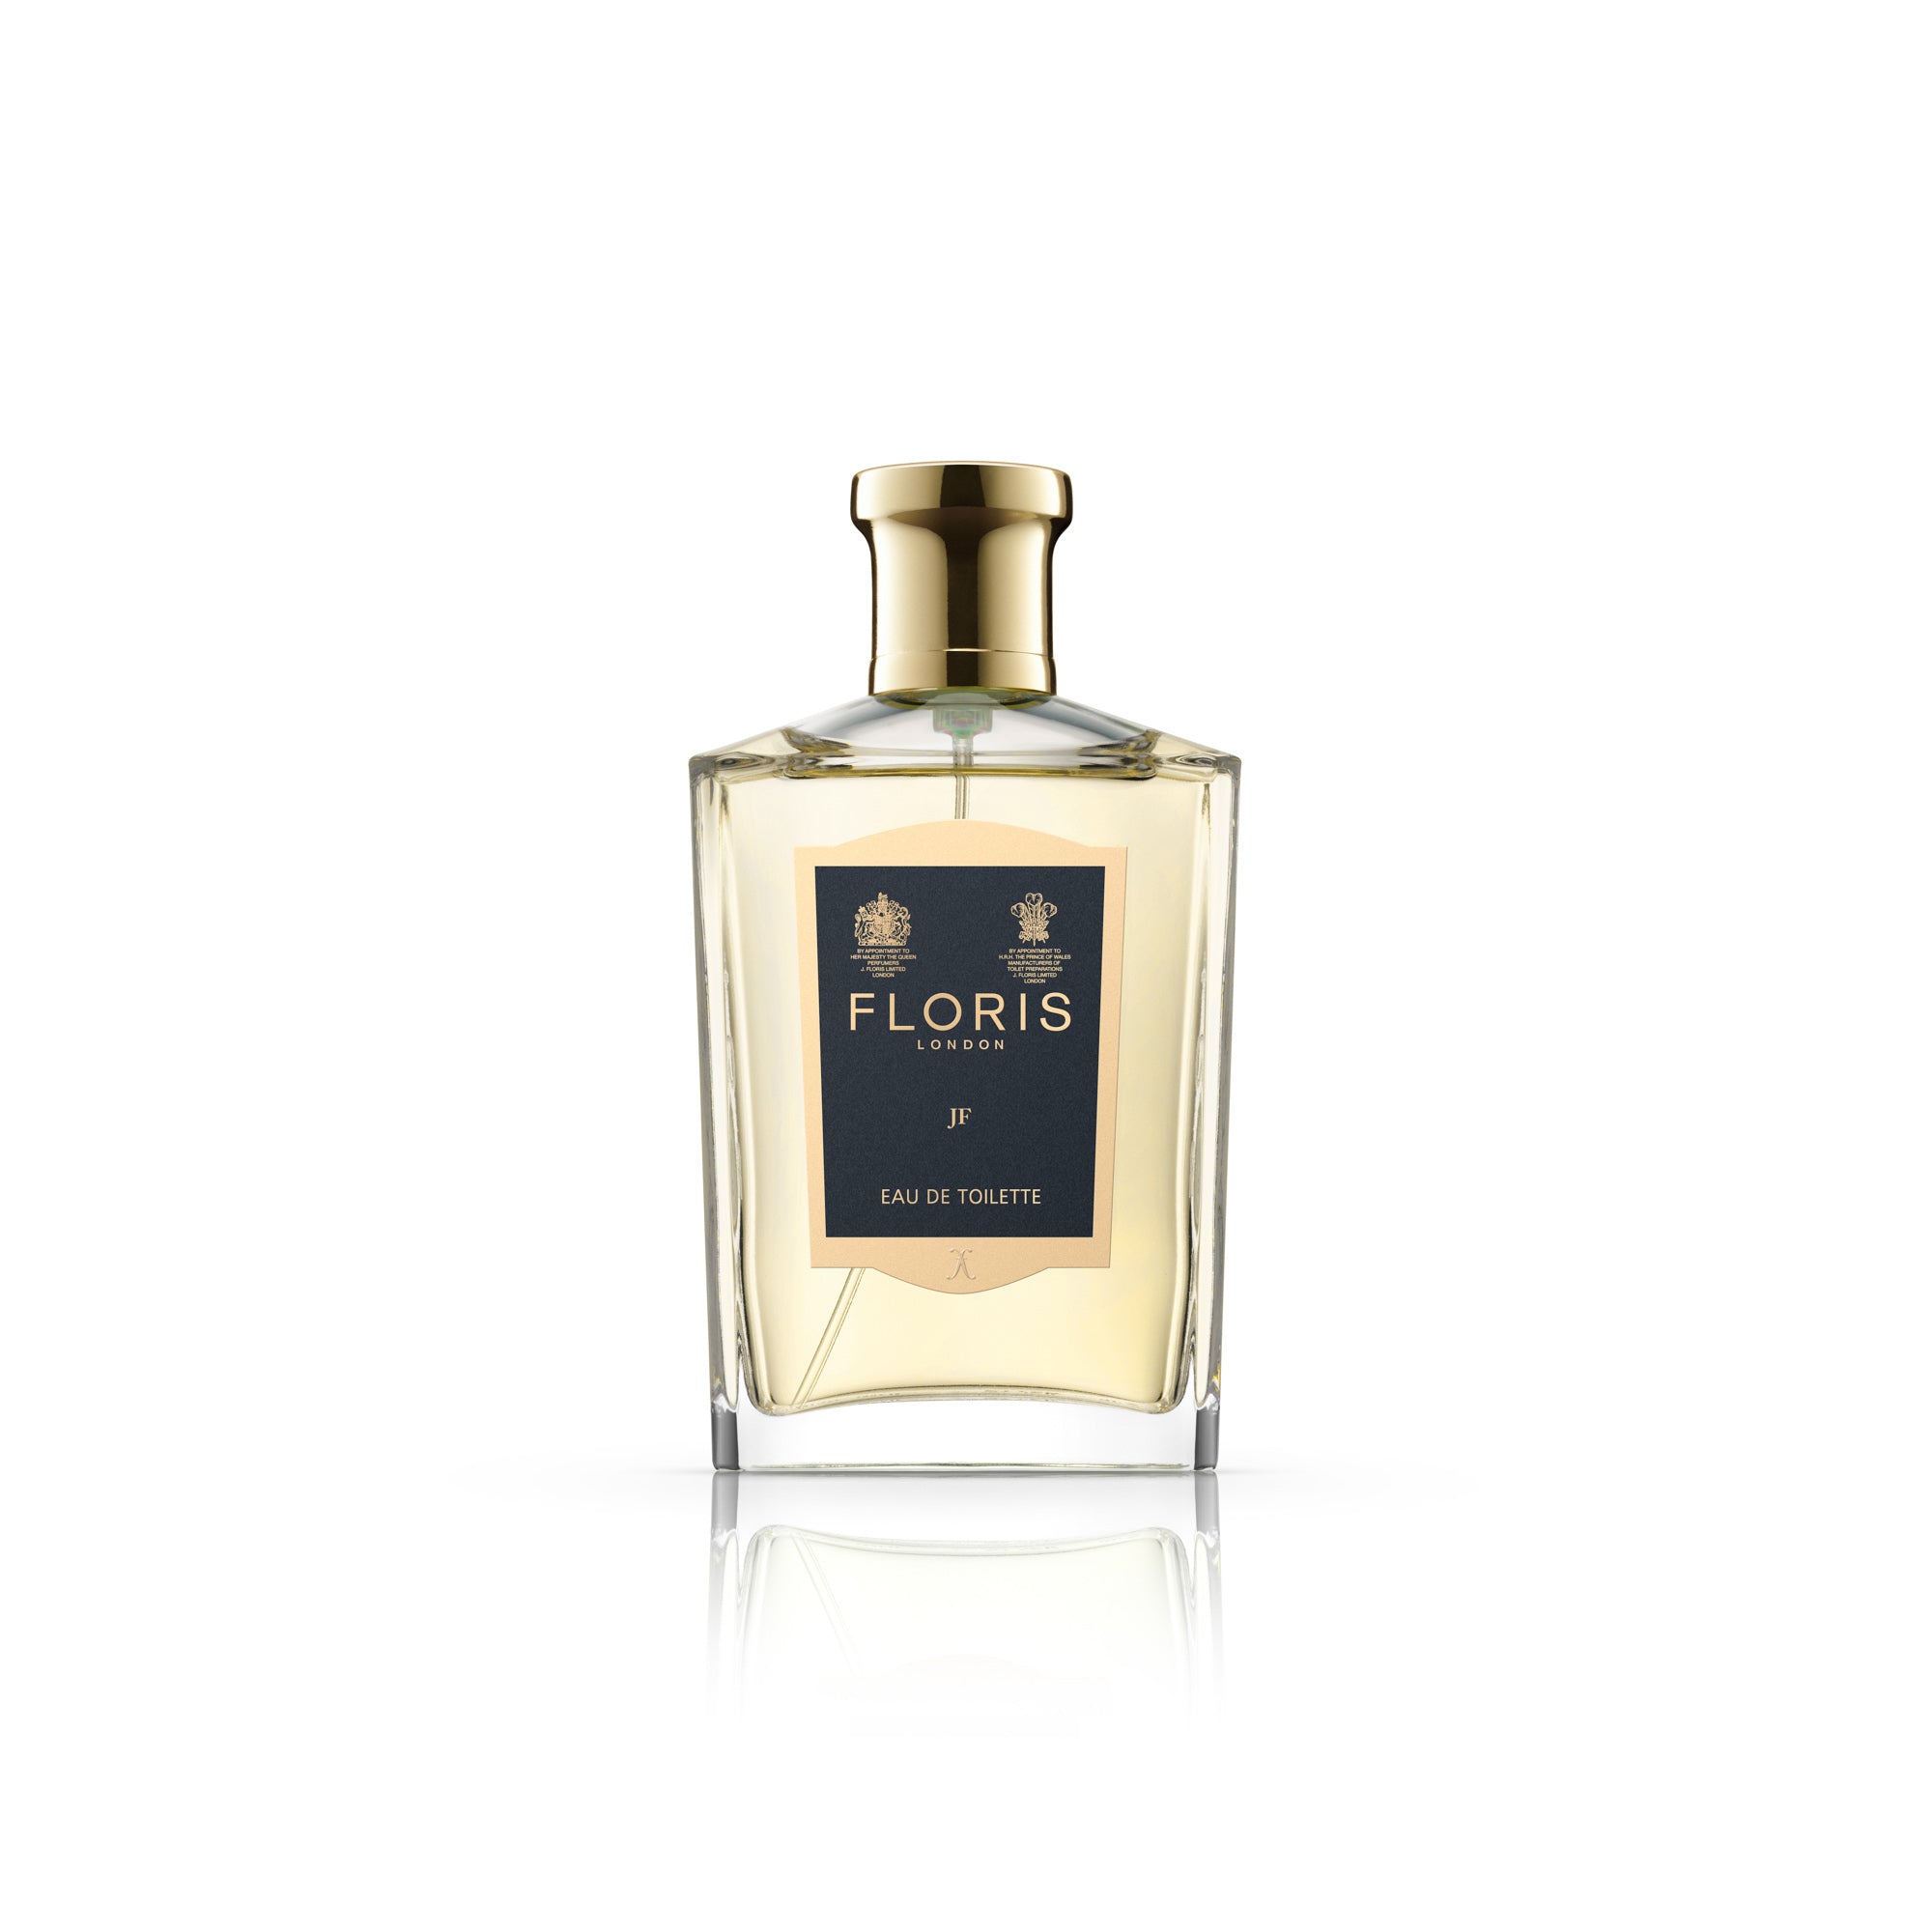 A bottle of FLORIS JF 100 ML citrus fragrance on a white background from KirbyAllison.com.